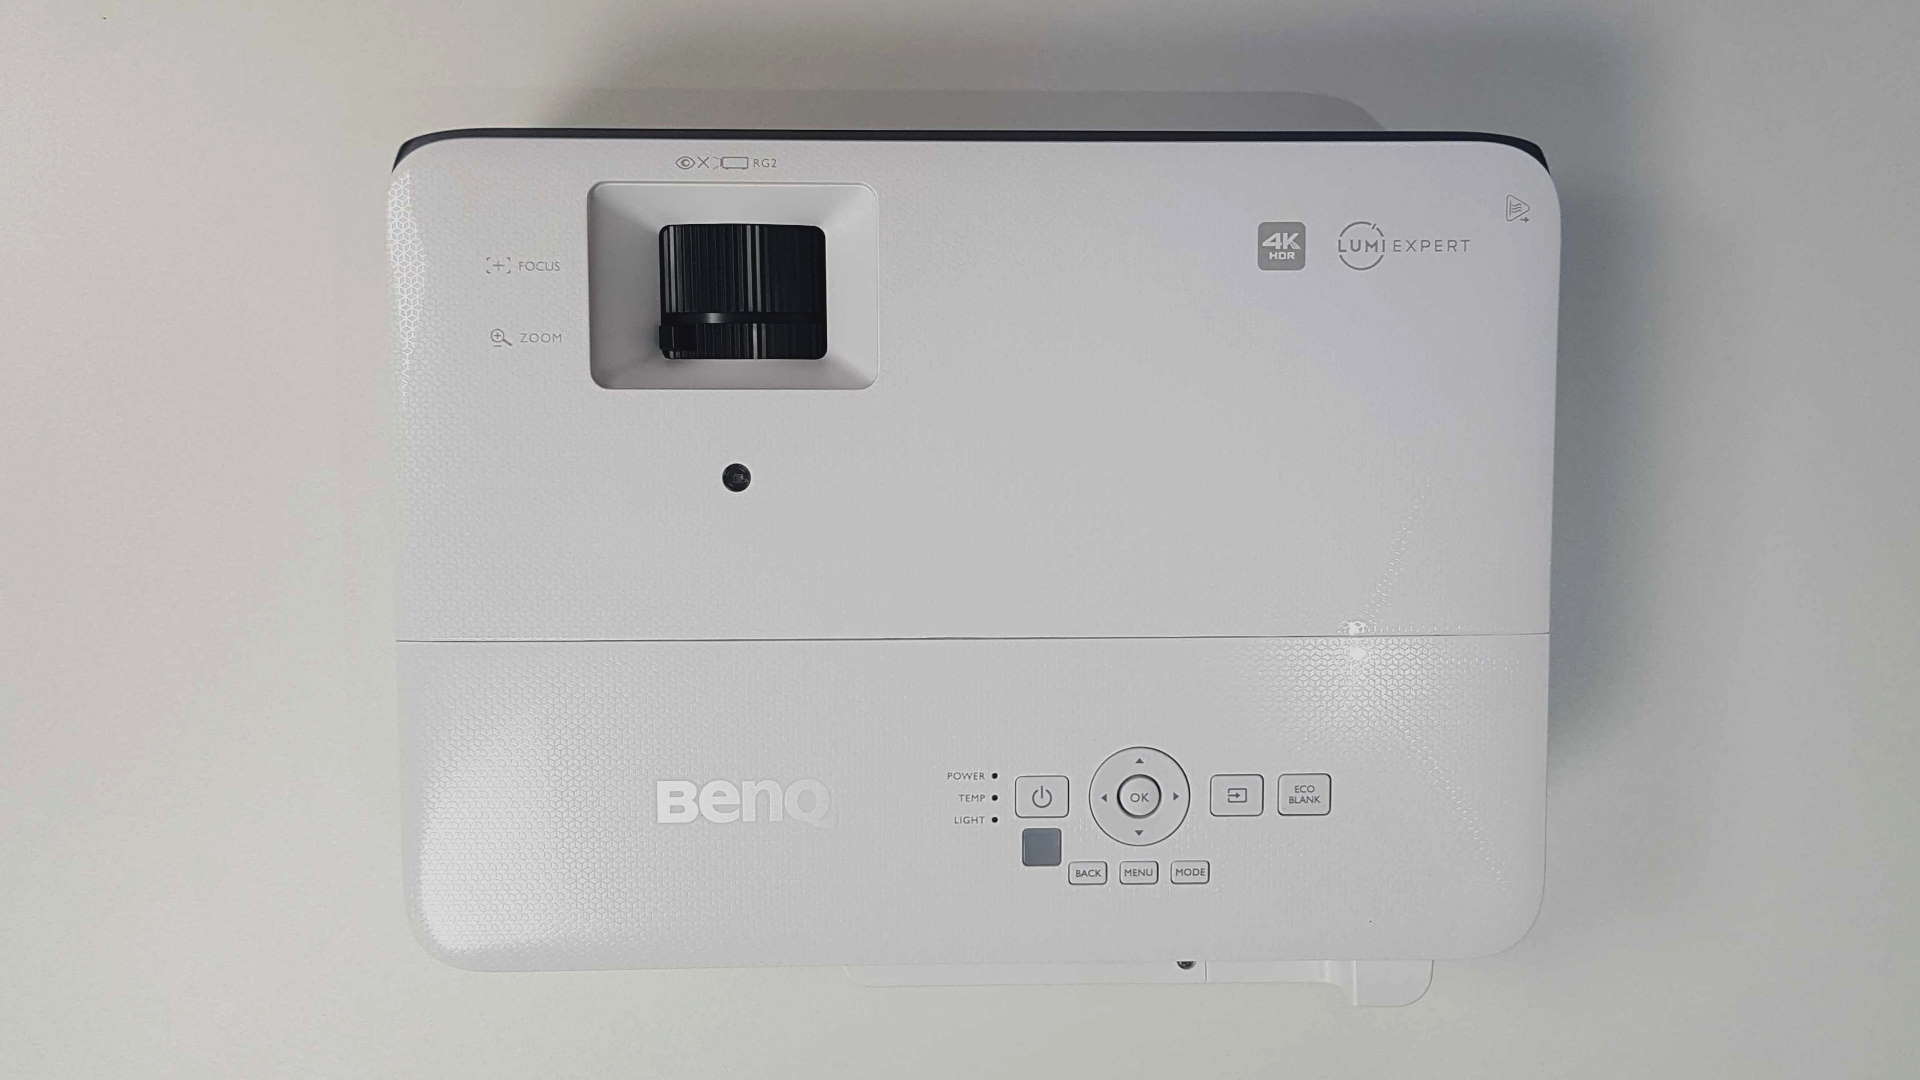 Benq TK700STi top down showing manual zoom and focus dials